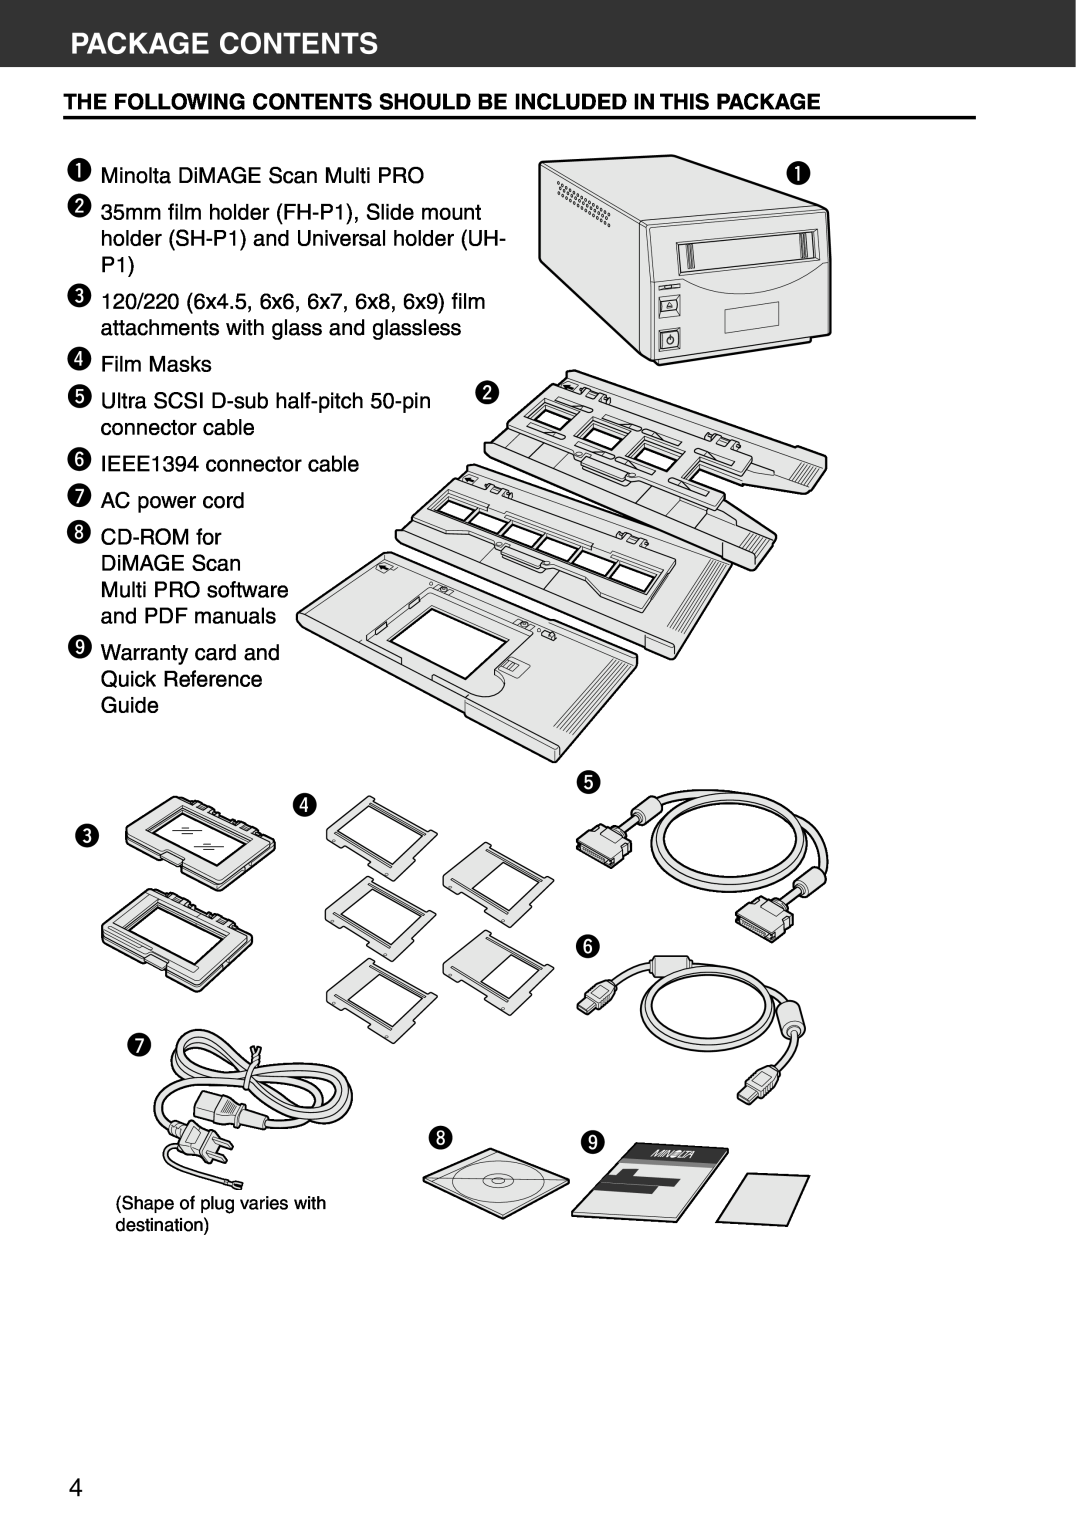 Konica Minolta Scan Multi PRO Package Contents, The Following Contents Should Be Included In This Package 